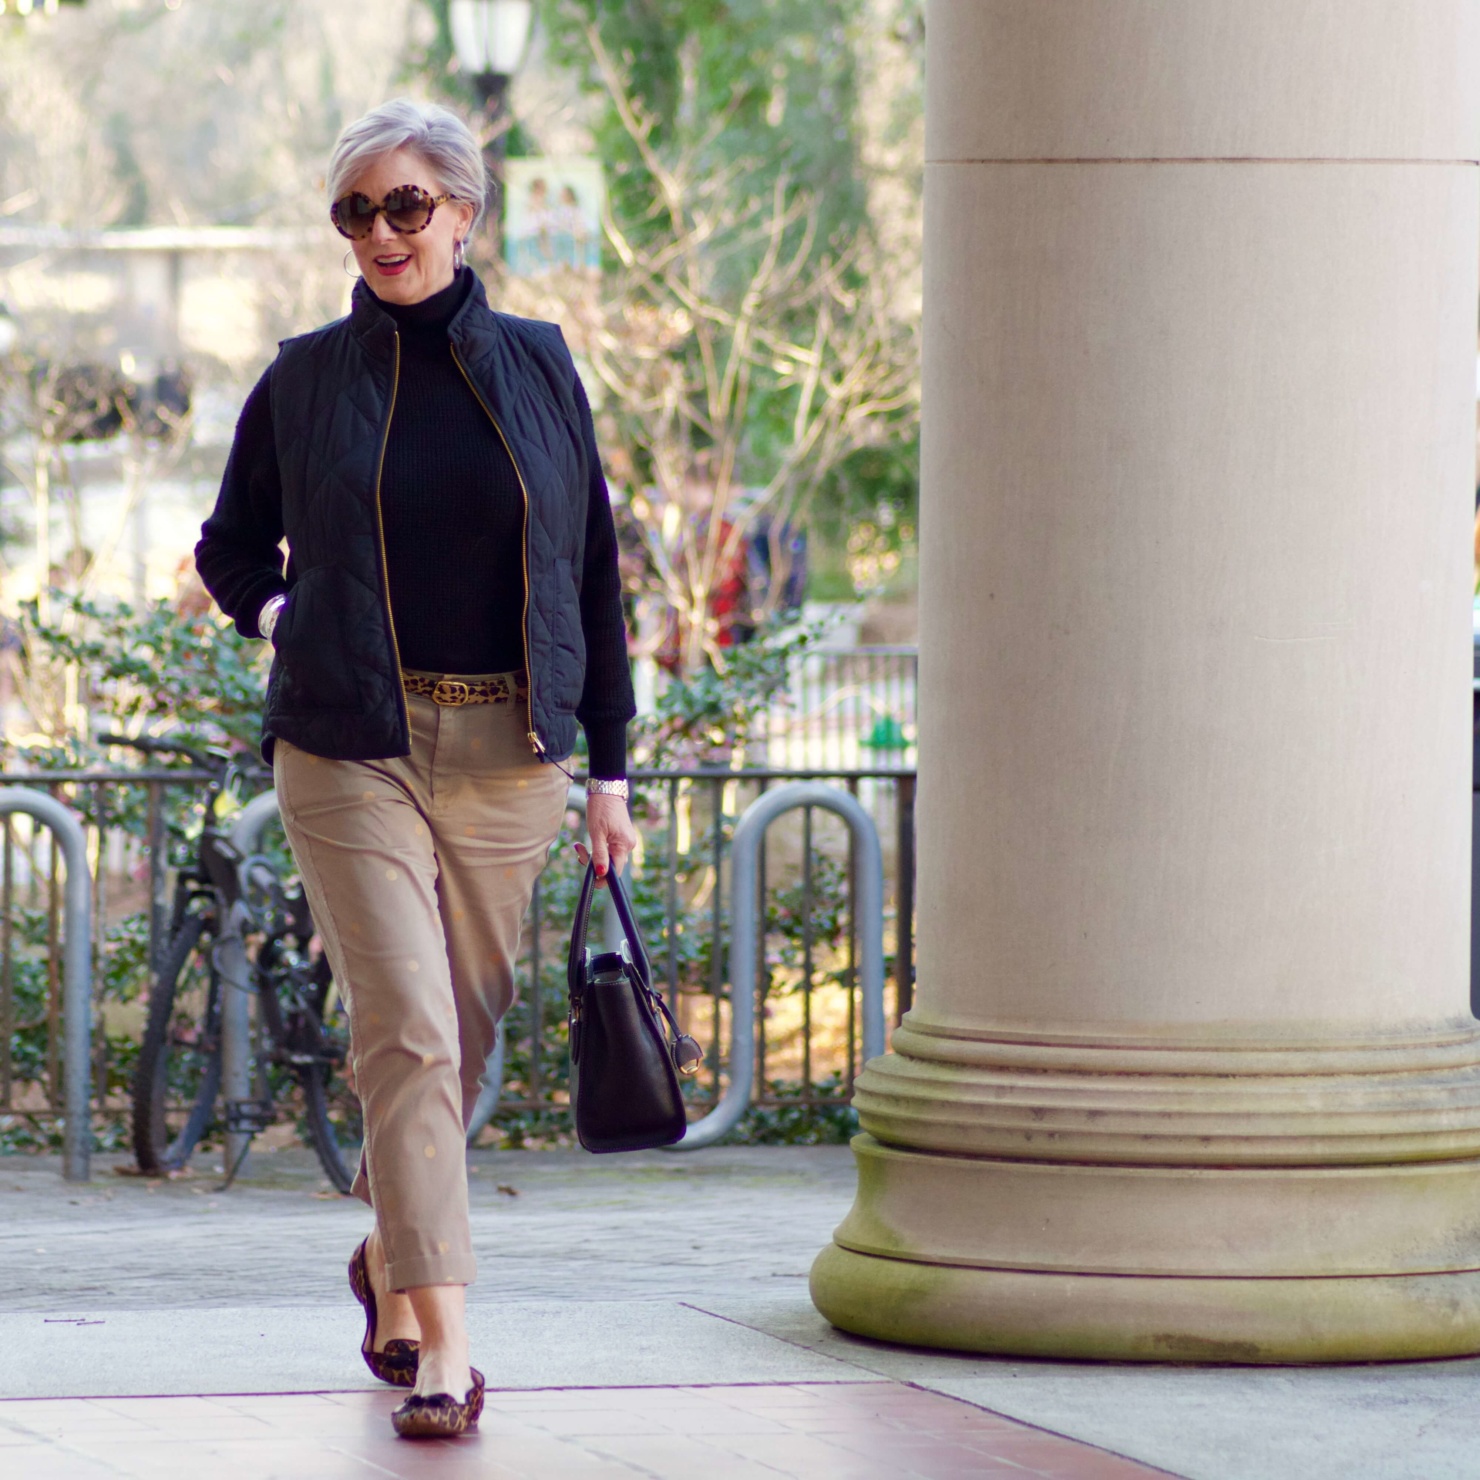 beth from Style at a Certain Age wears J.Crew polka dot chinos, Everlane cashmere waffle turtleneck, J.Crew Factory puffer vest, and Ann Taylor leopard flats